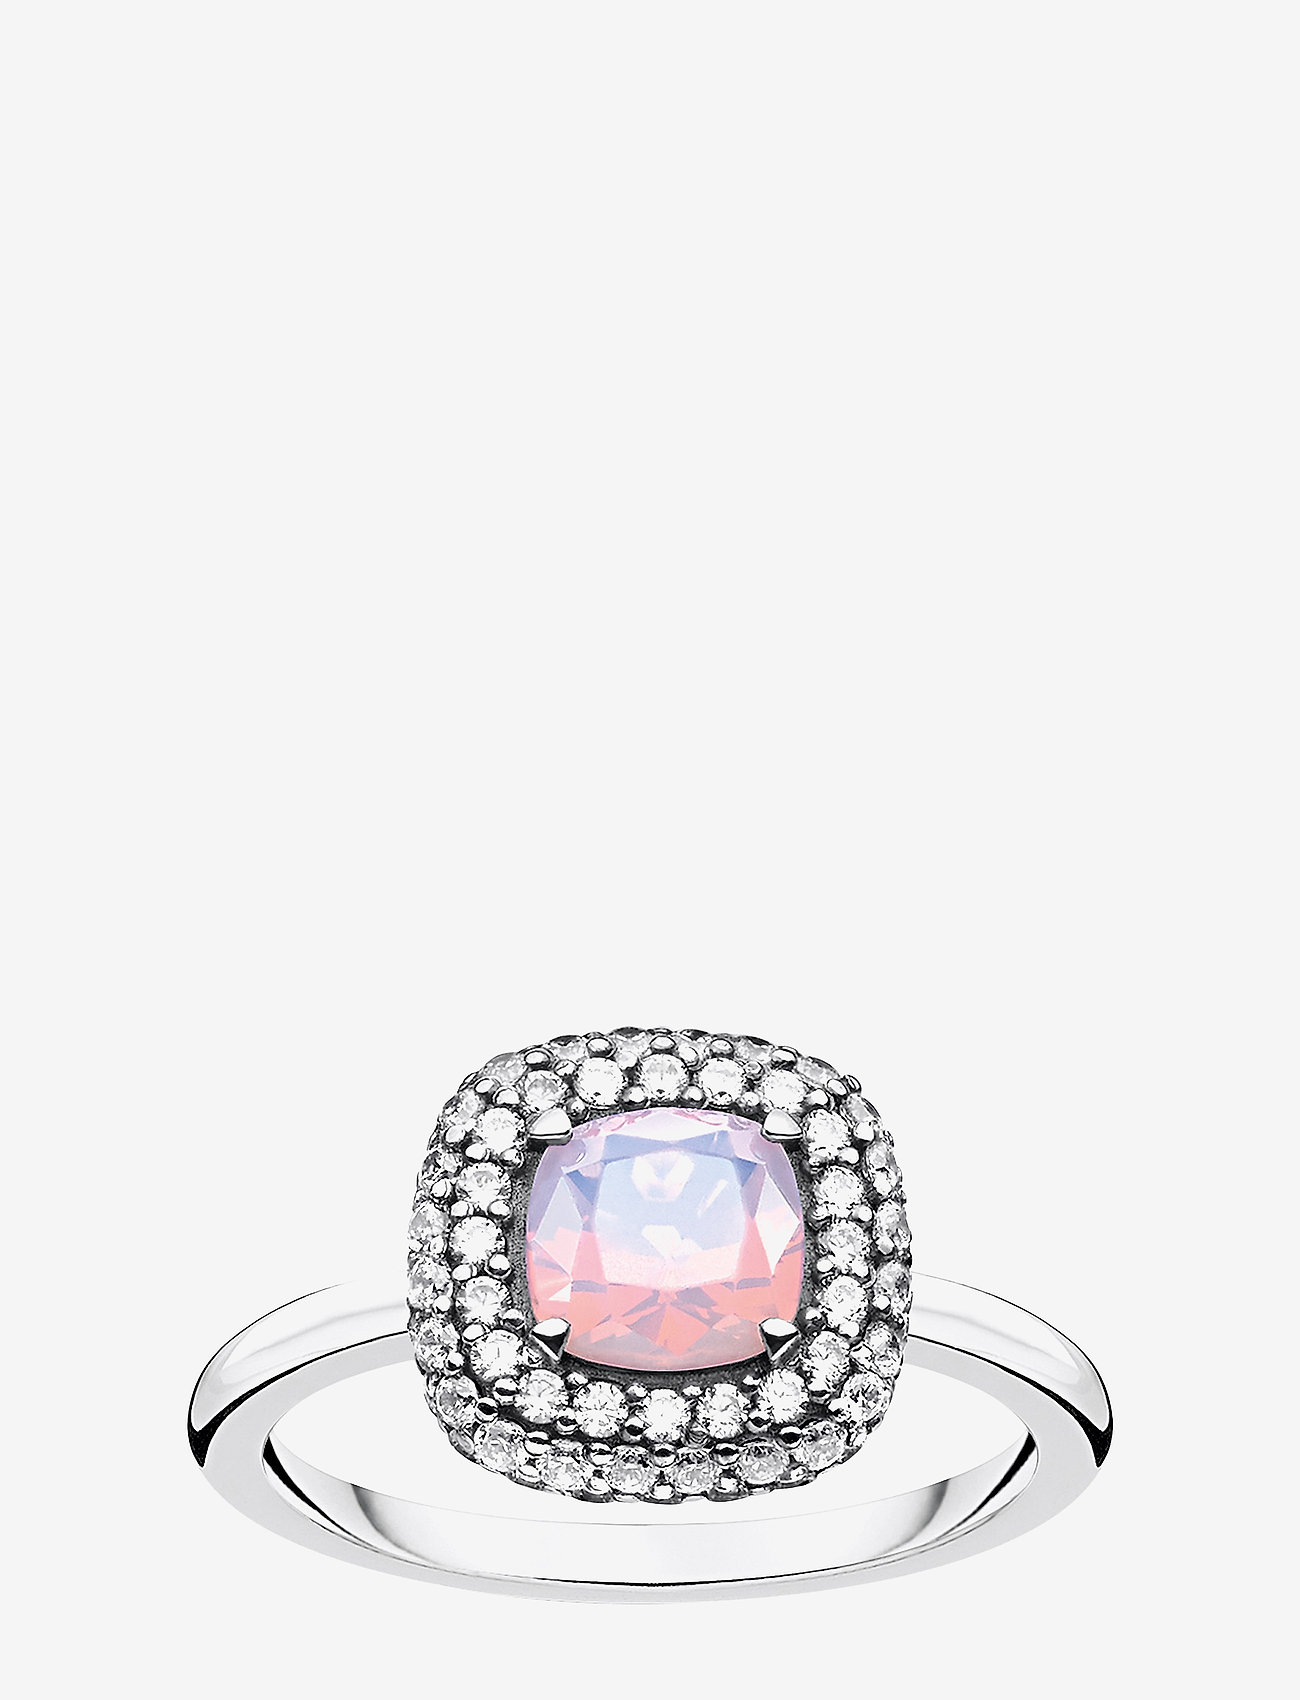 Thomas Sabo Ring Shimmering Pink Colour Effect - Jewellery | Boozt.com